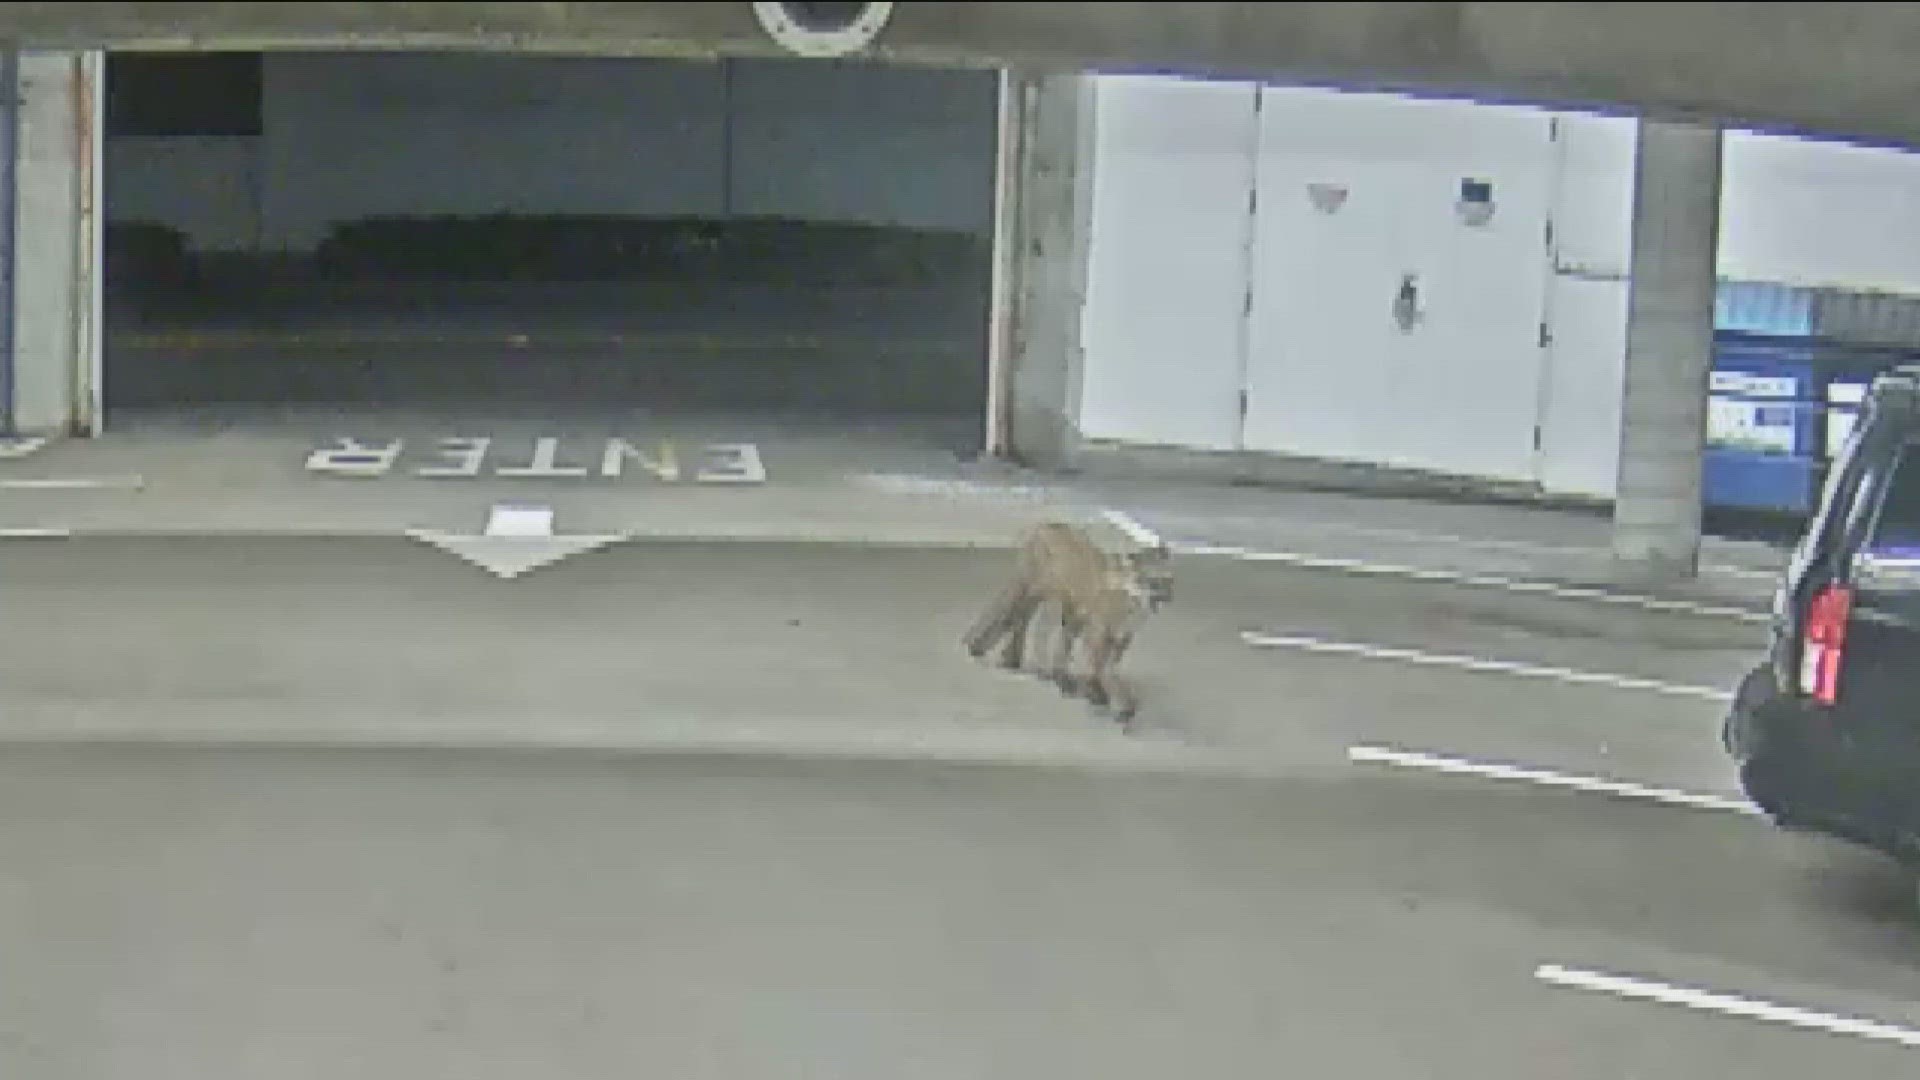 The big cat was seen in a downtown parking garage and looking into a movie theater.